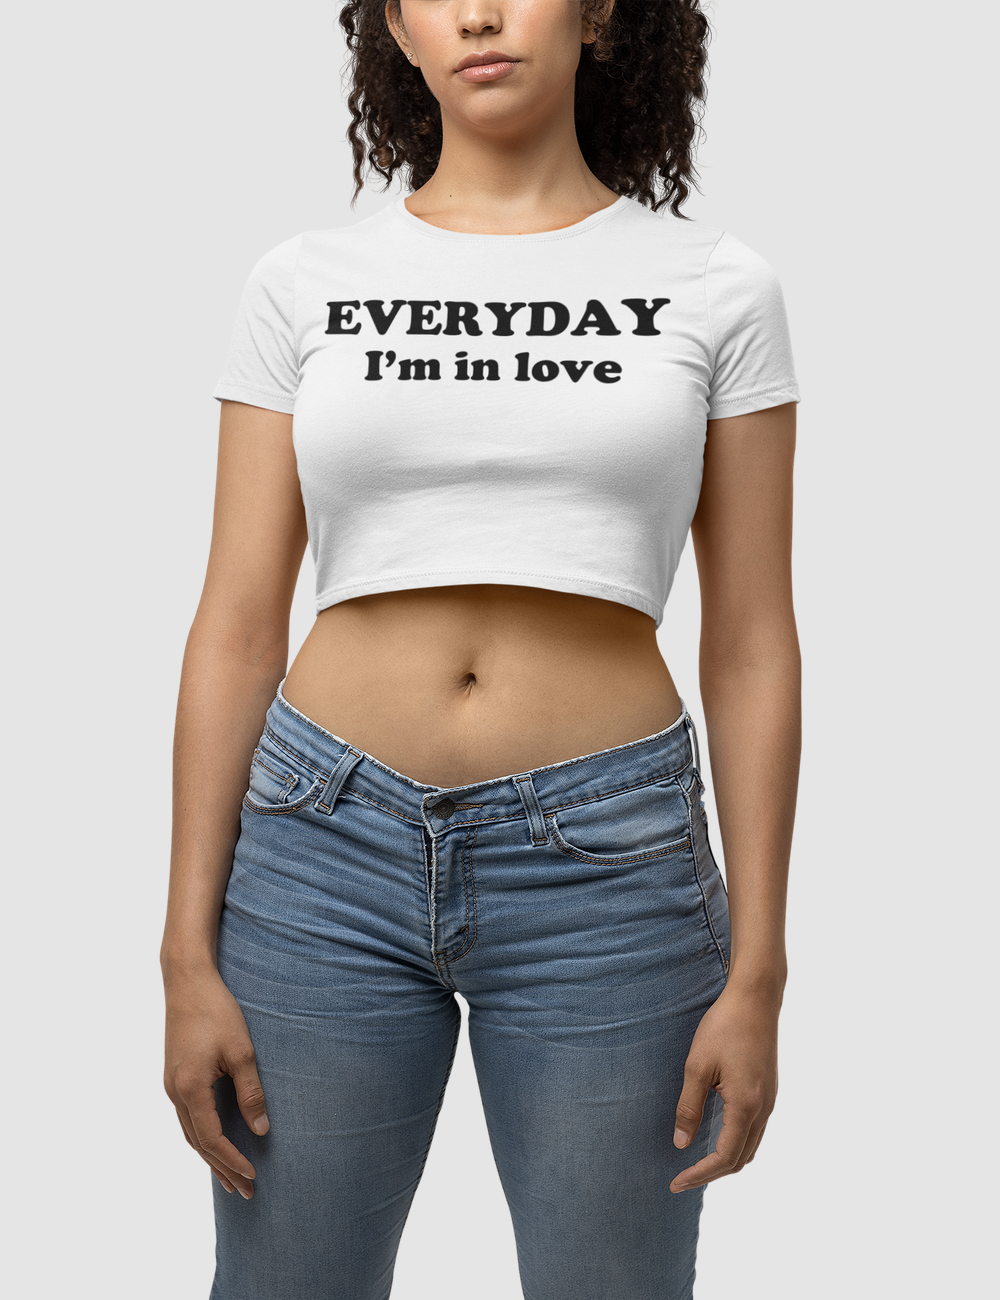 Everyday I'm In Love Women's Fitted Crop Top T-Shirt OniTakai